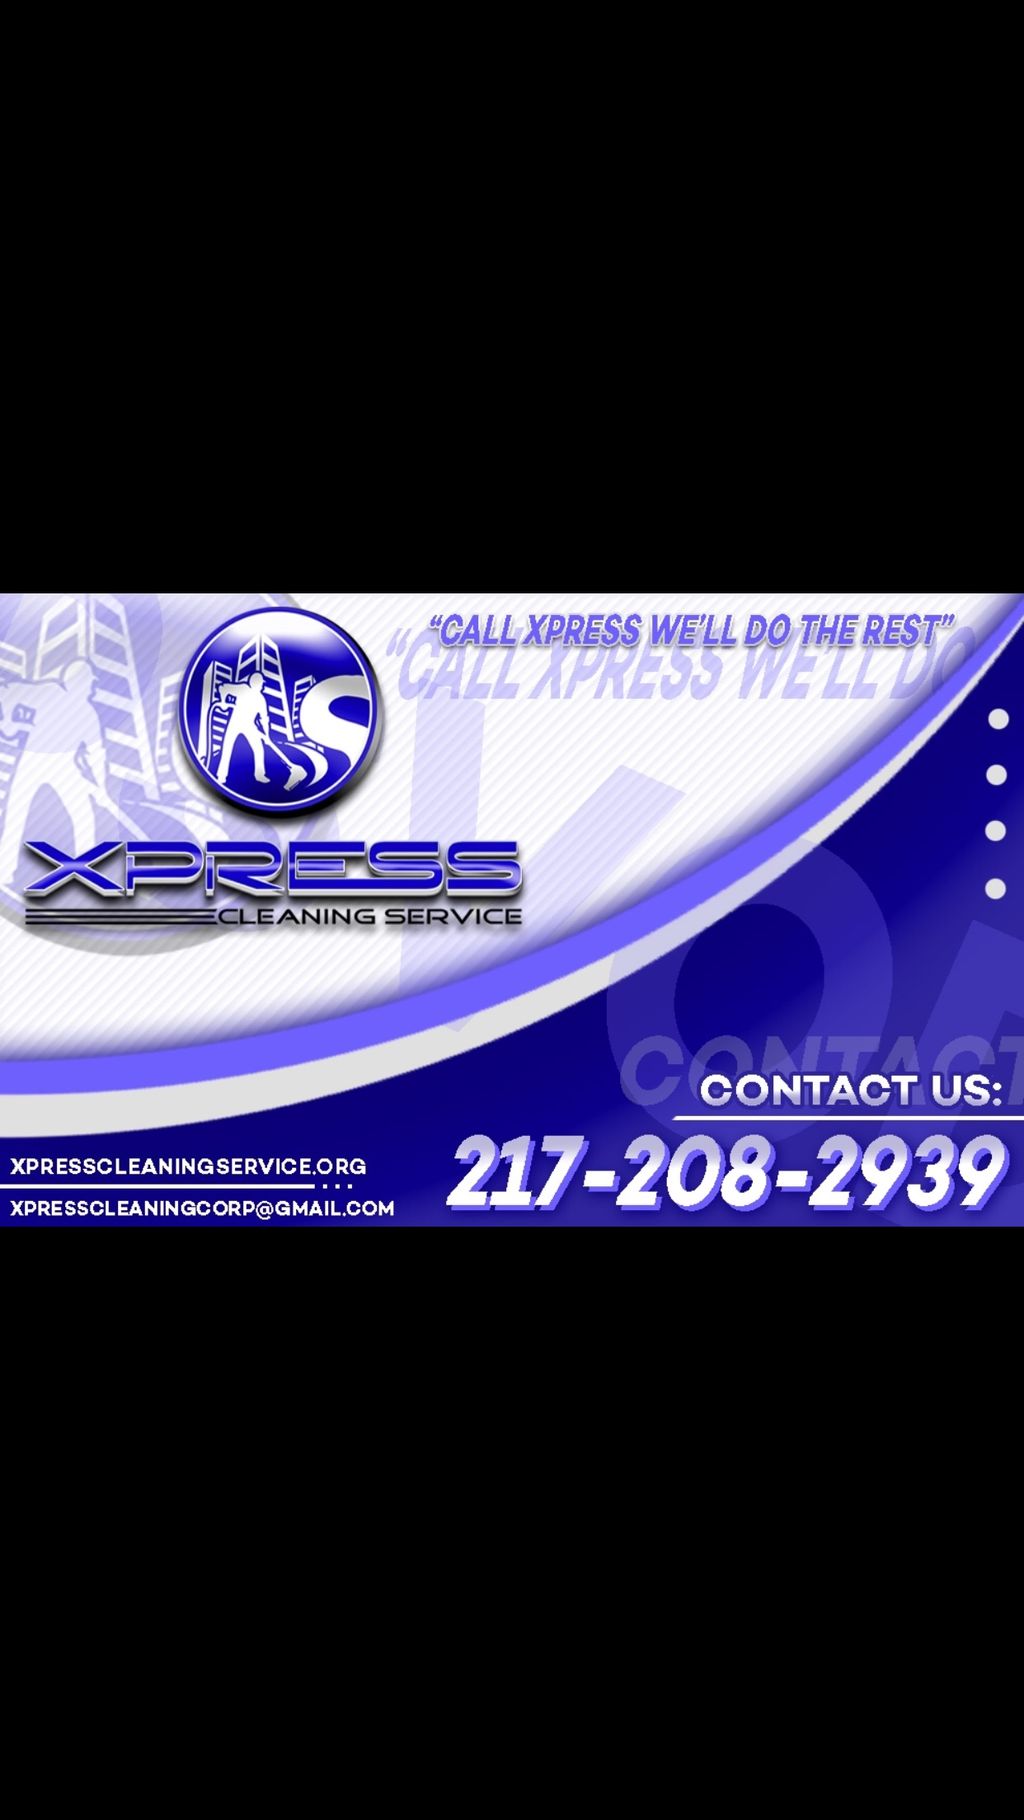 Xpress Cleaning Service